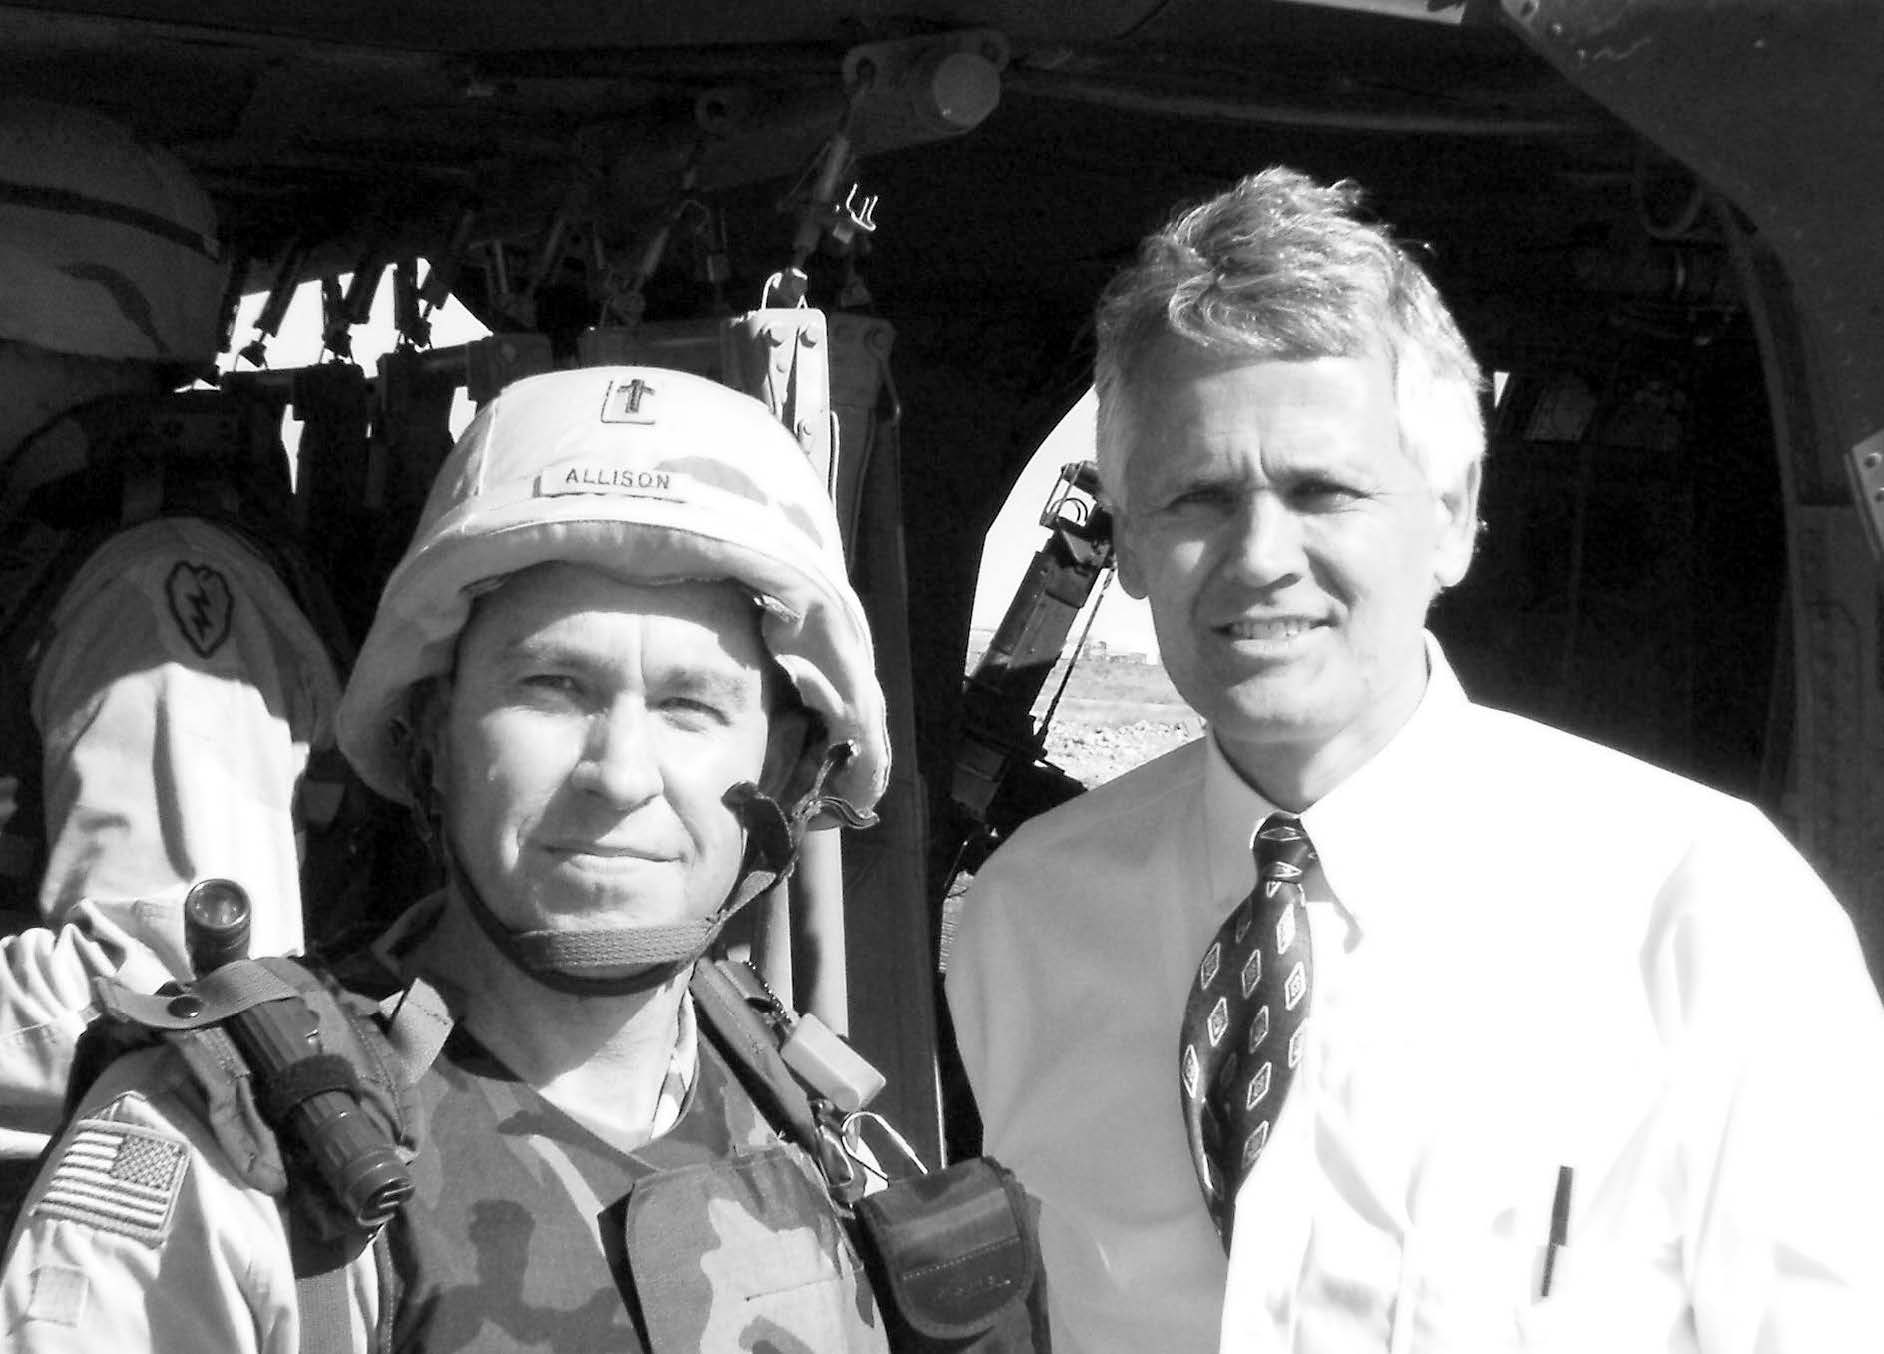 Latter-day Saint chaplain Mark Allison (left) and Area Authority Seventy William Jackson prior to taking a helicopter trip. Courtesy of Mark Allison.